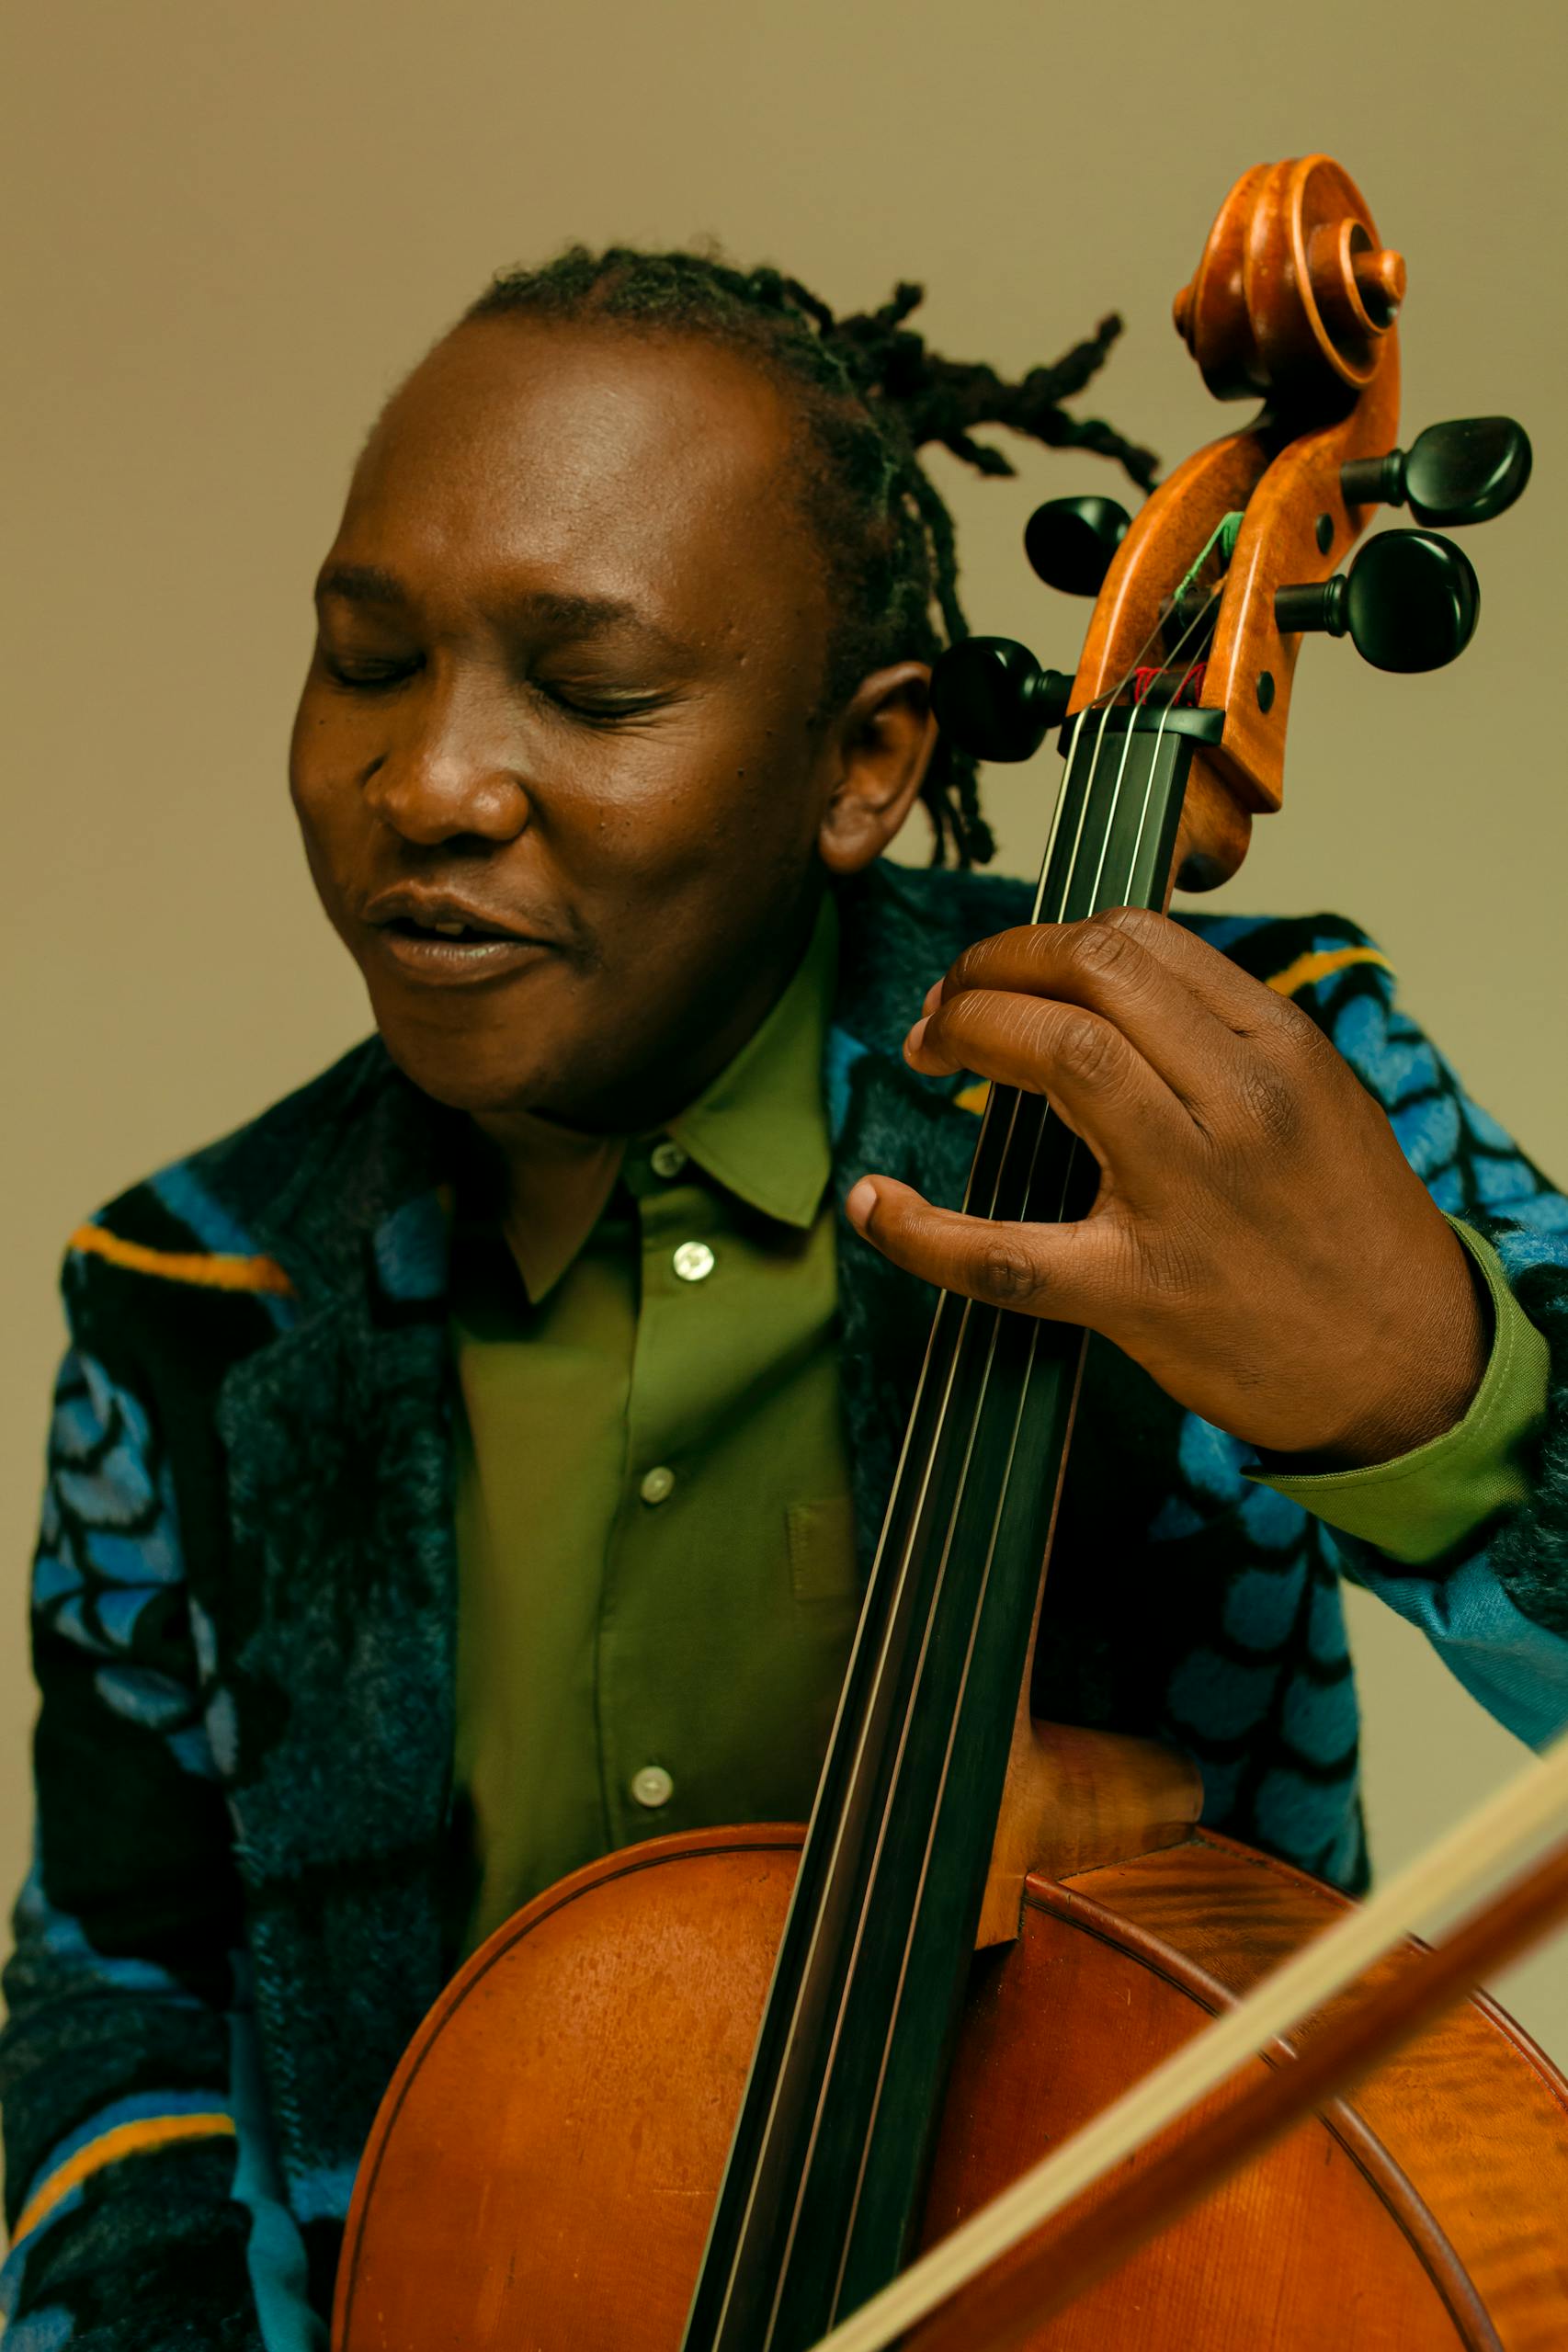 The genre-bending South African cellist Abel Selaocoe will perform with St. Paul Chamber Orchestra in April.